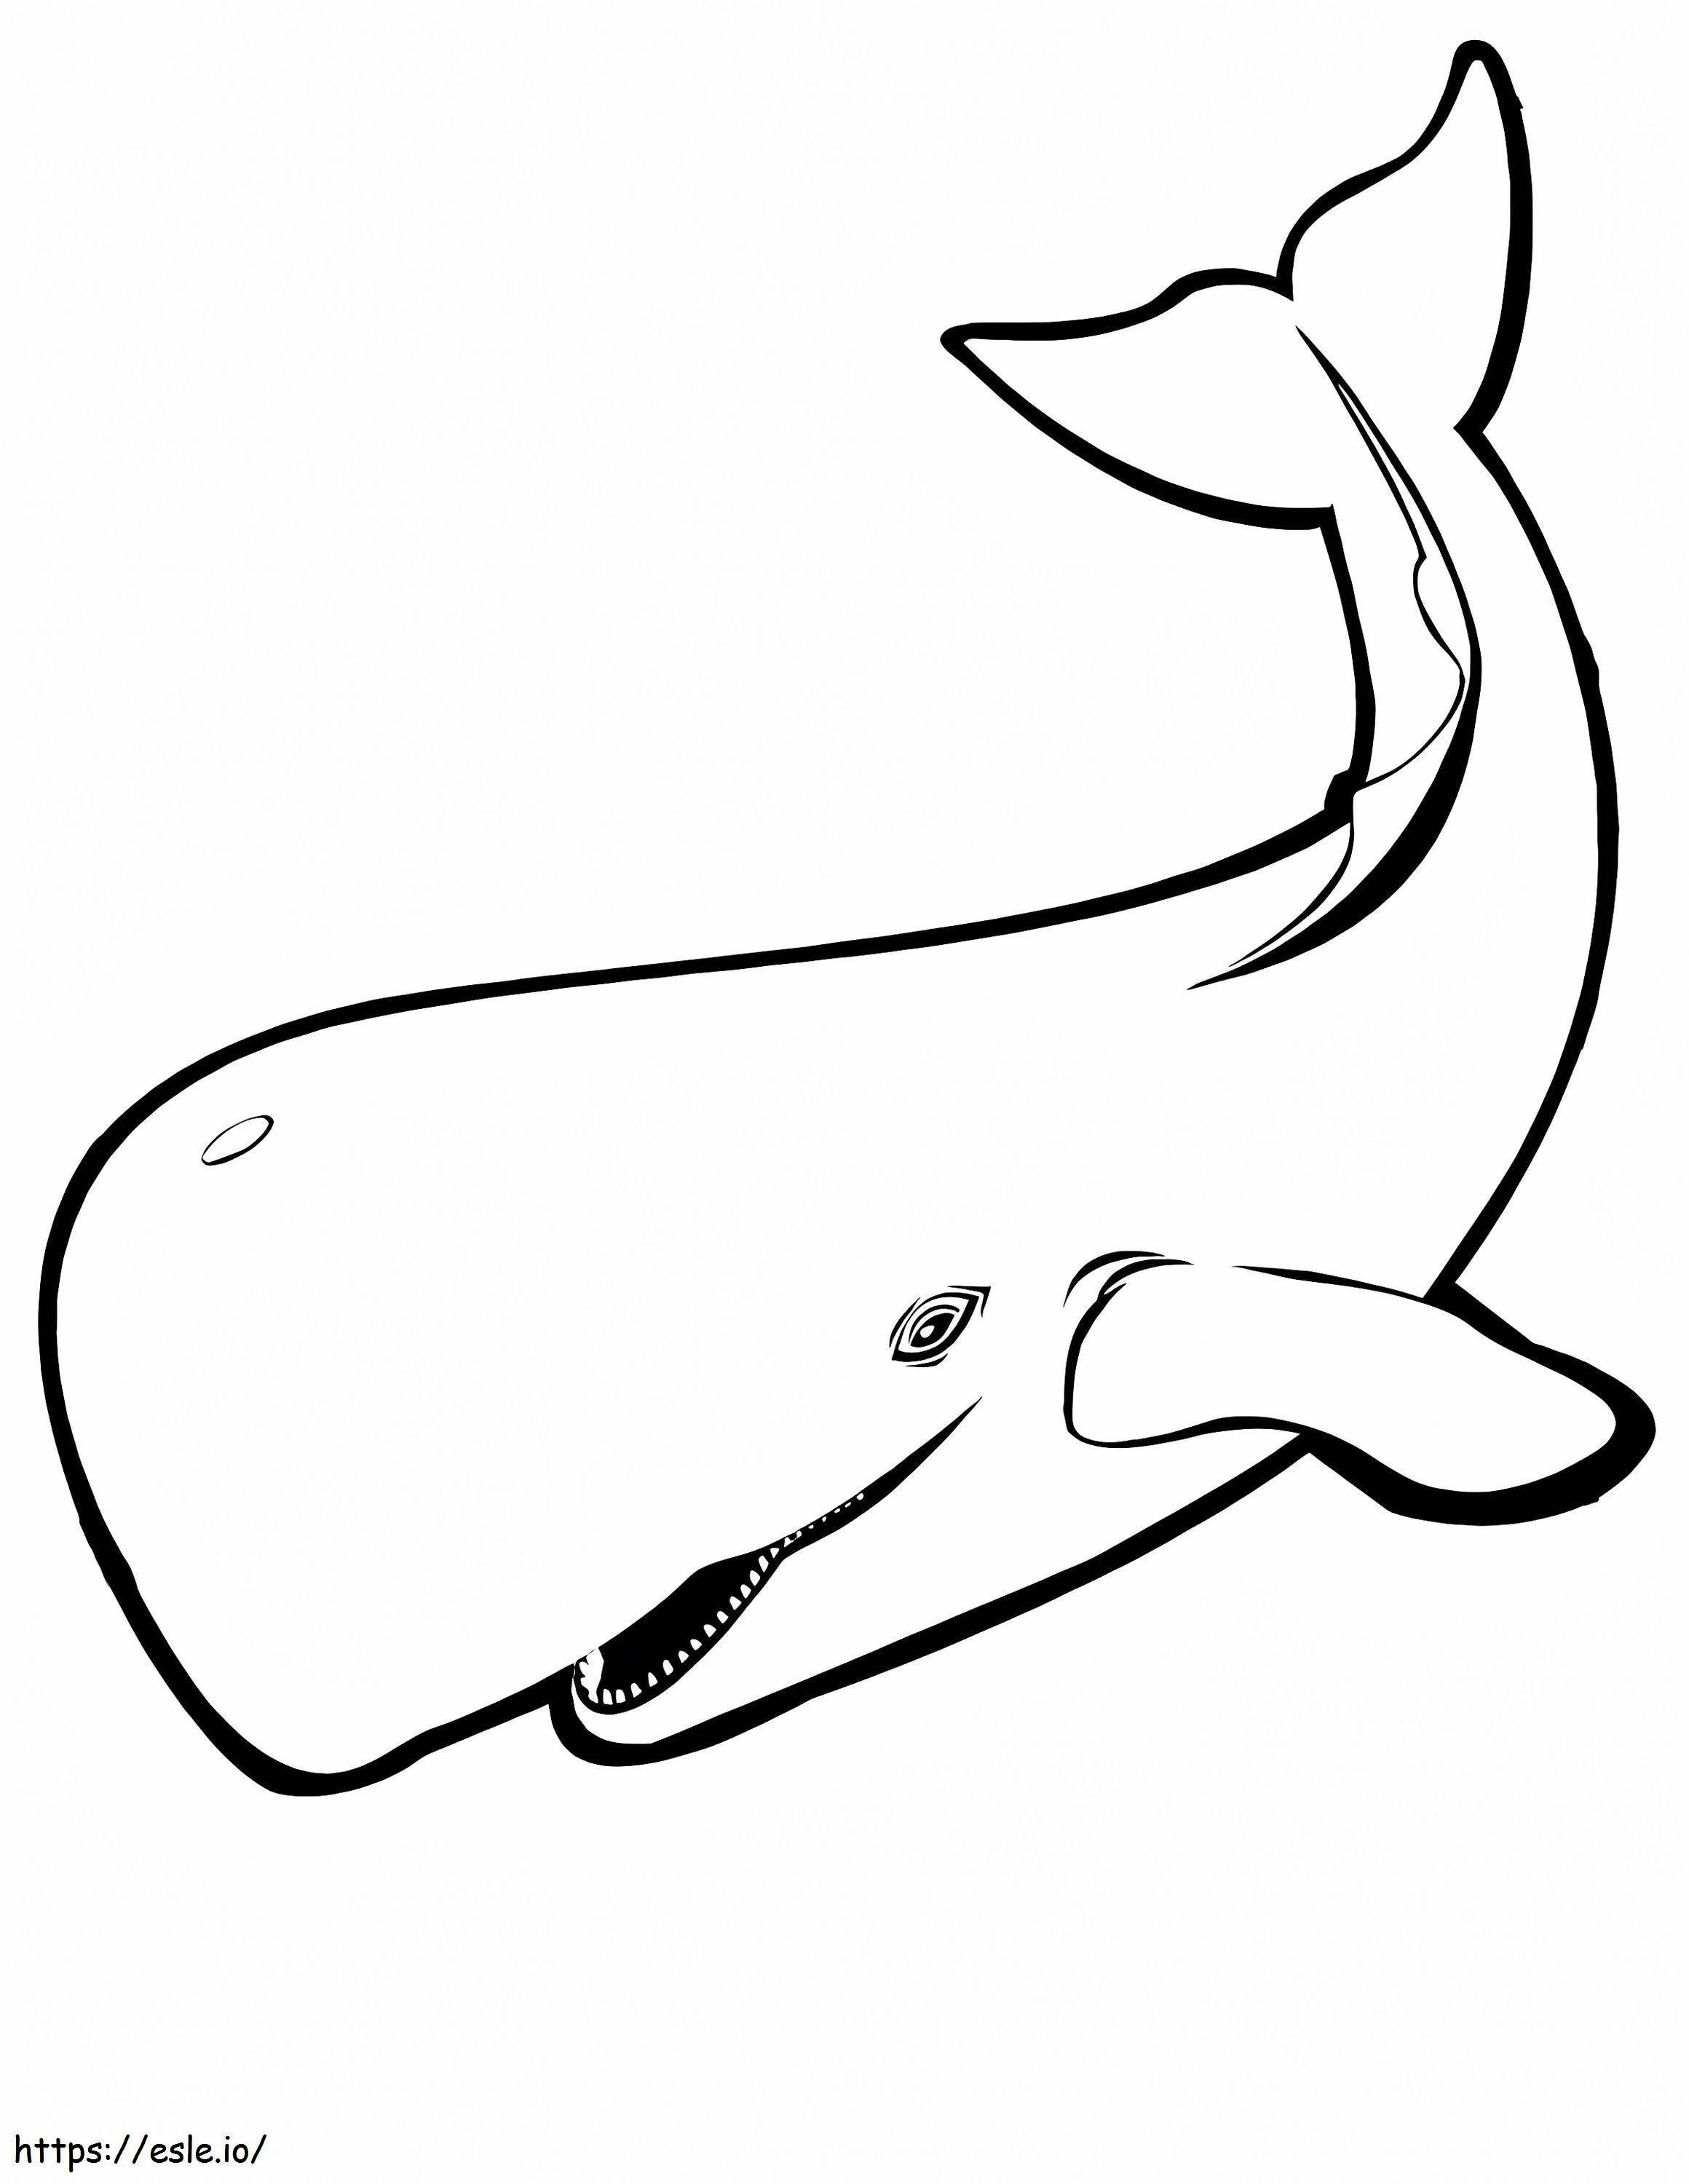 1541747932 Whale Coloringkids Org coloring page